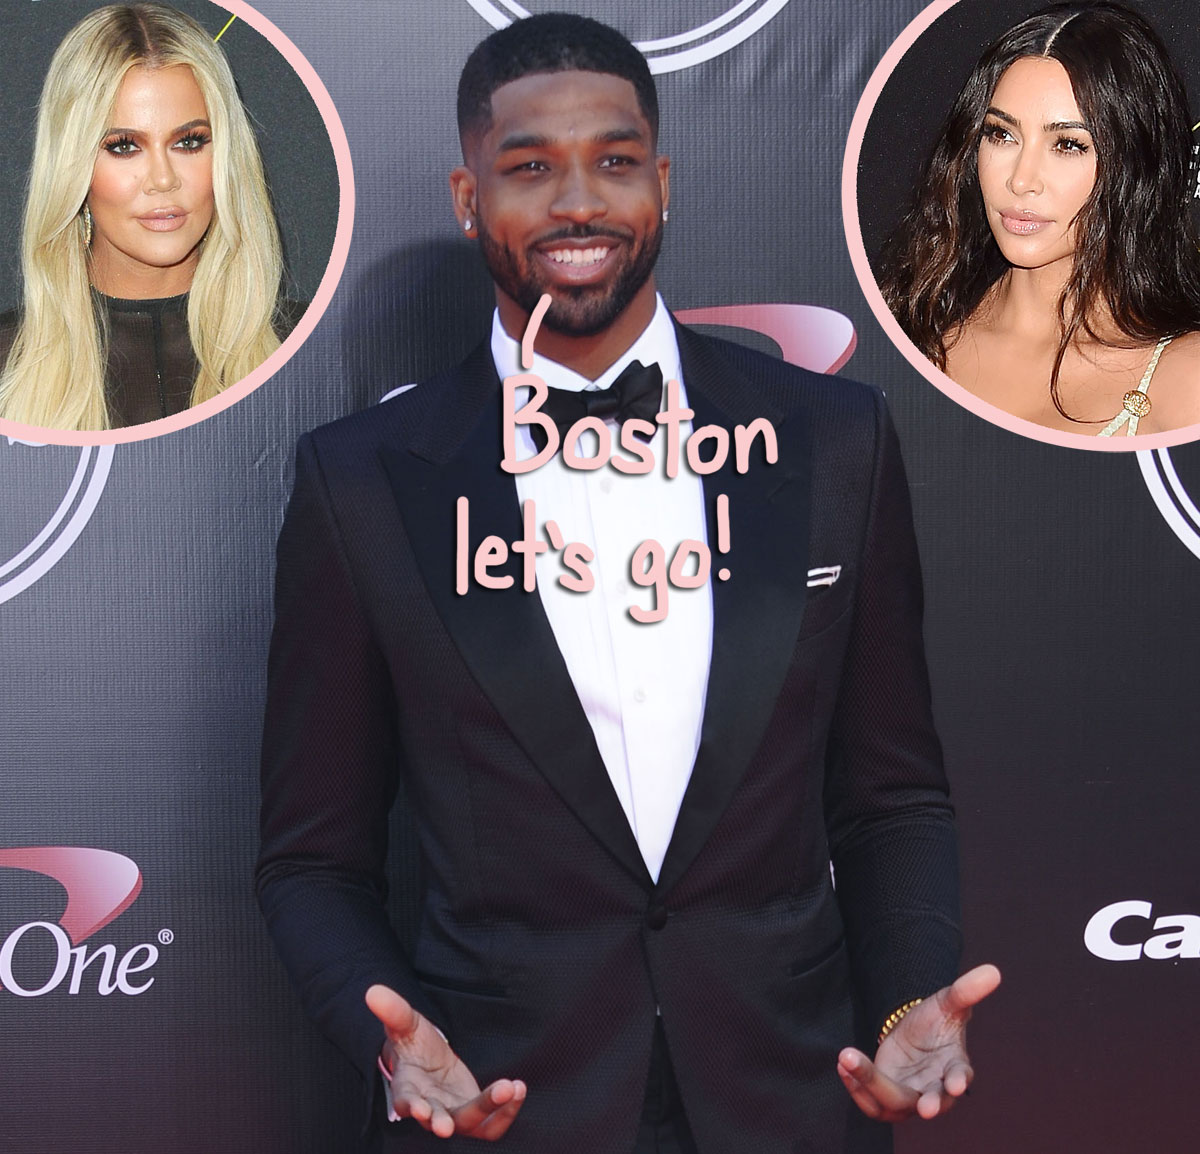 Tristan Thompson Signs With The Boston Celtics - Kim Kardashian Reacts, But Nothing From KhloÃ©... | Celebilicious